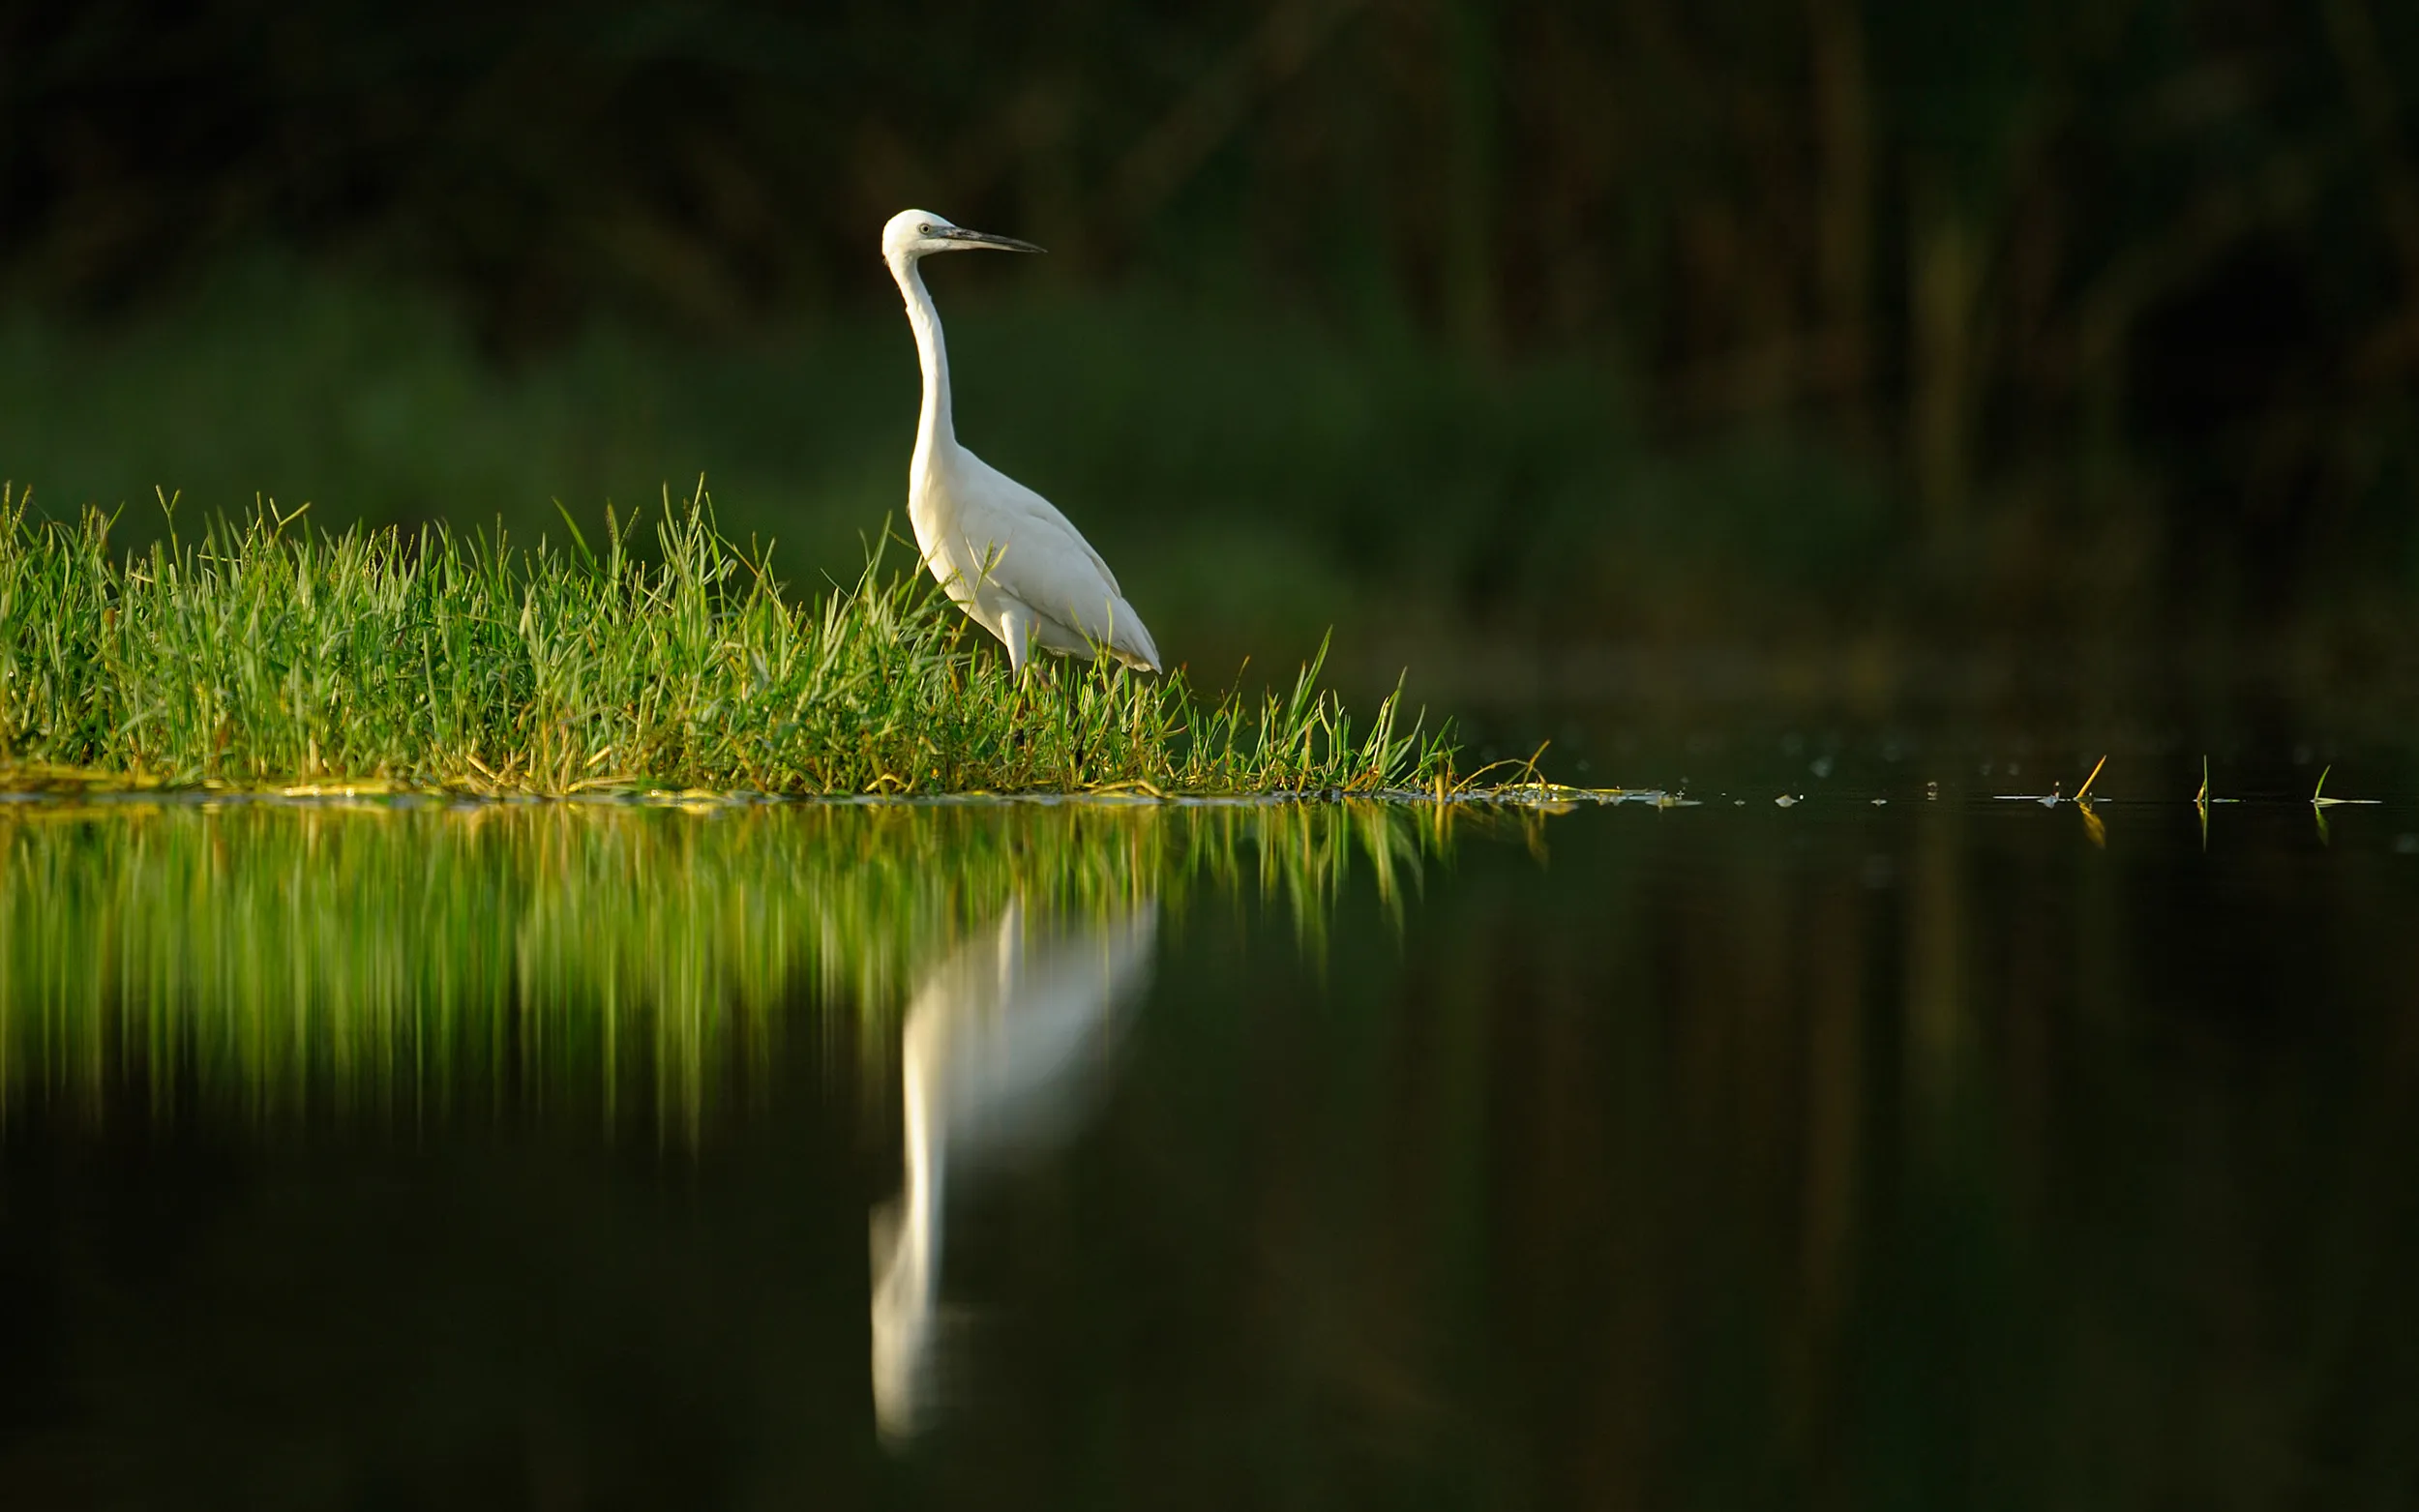 Lone Little Egret, stood on a grassy bank, the bird is reflected in the dark, still water.